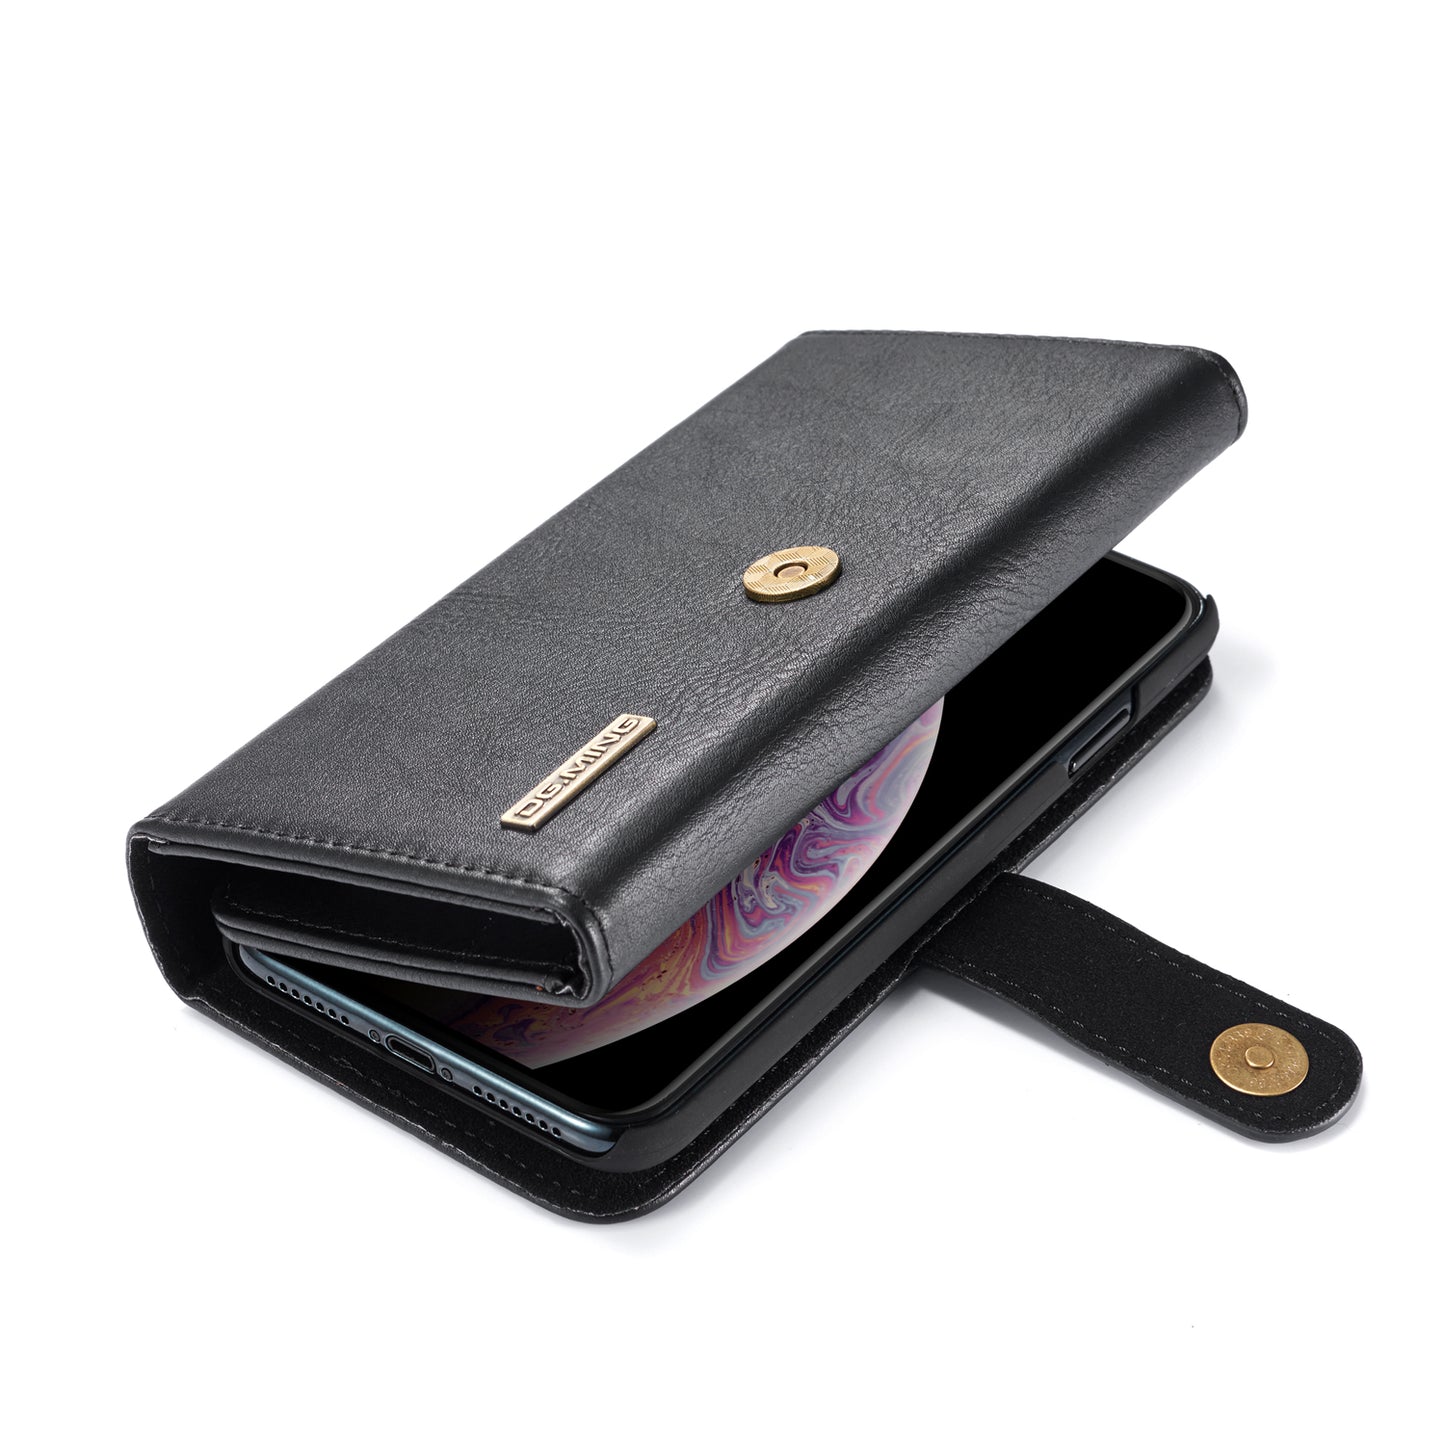 Multifunctional Wallet Card holder Leather Case for iPhone X/XR/XS/XS MAX - imhave